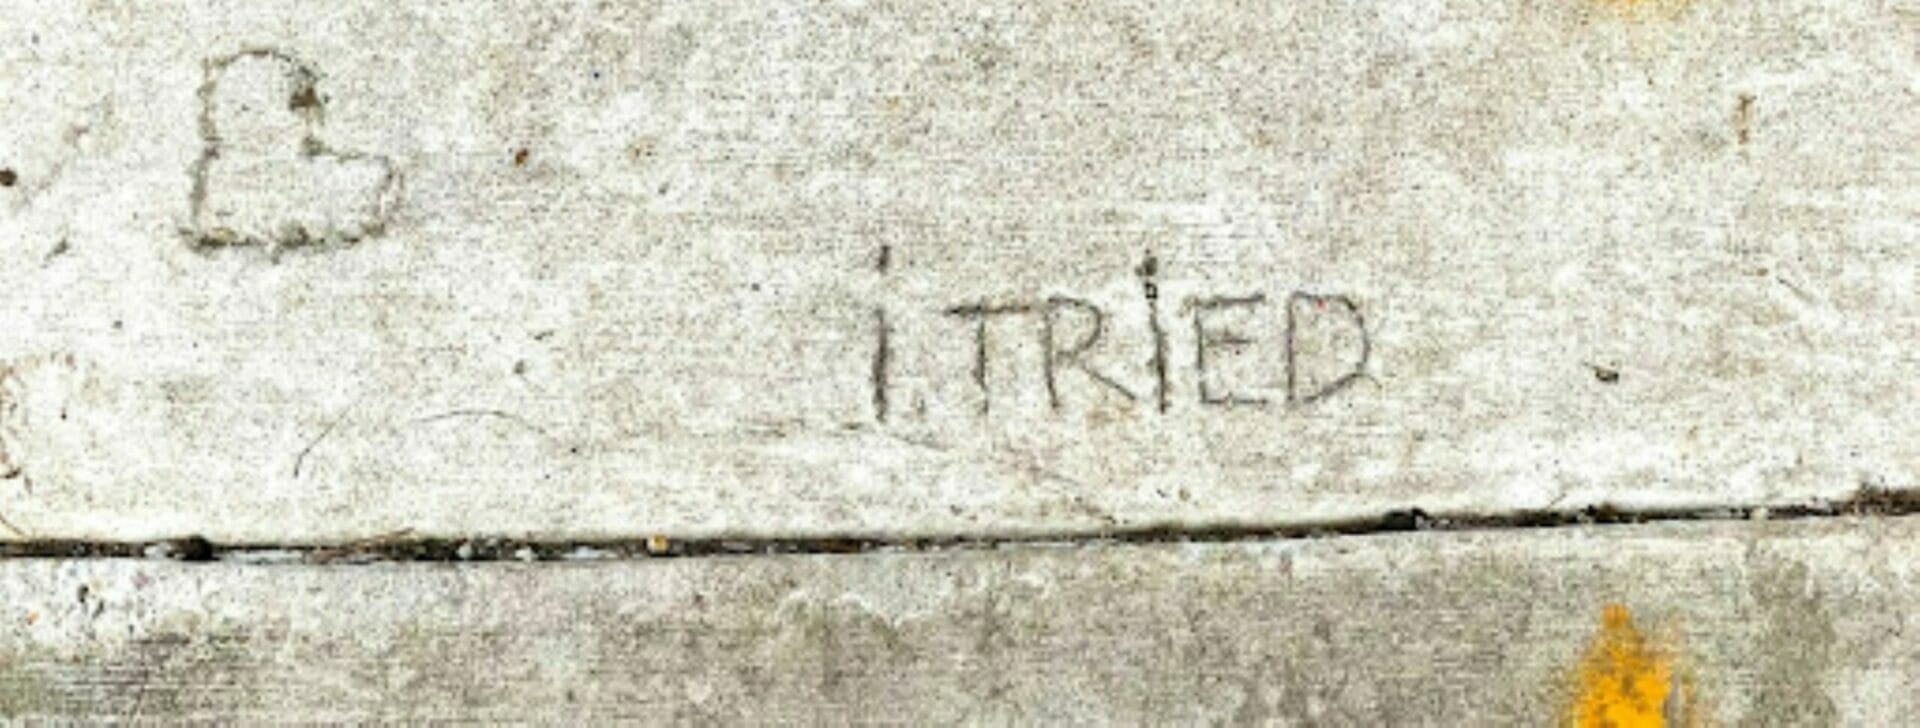 'I Tried' written into cement - Let's Start with "Try"​